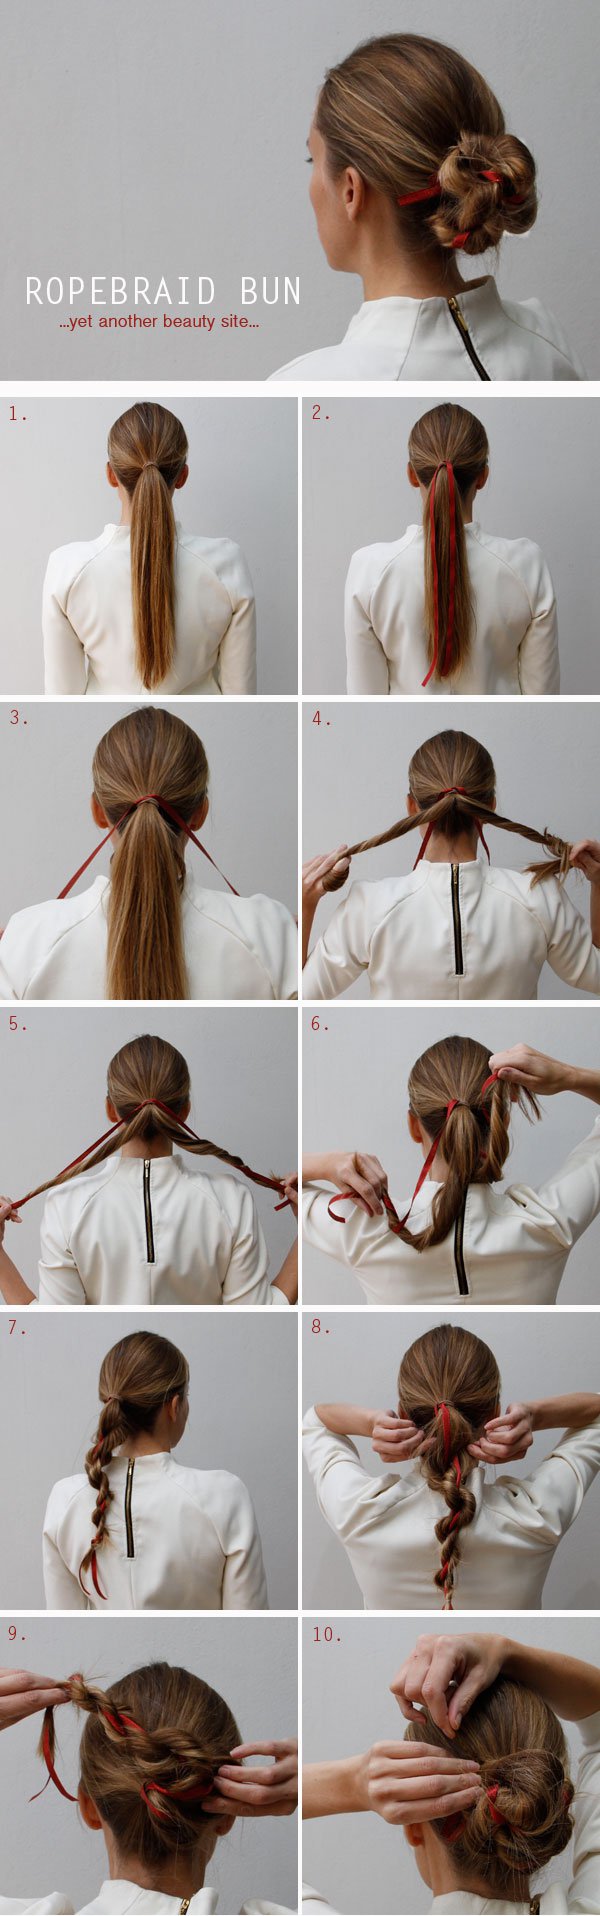 15 Quick DIY Hairstyle Ideas